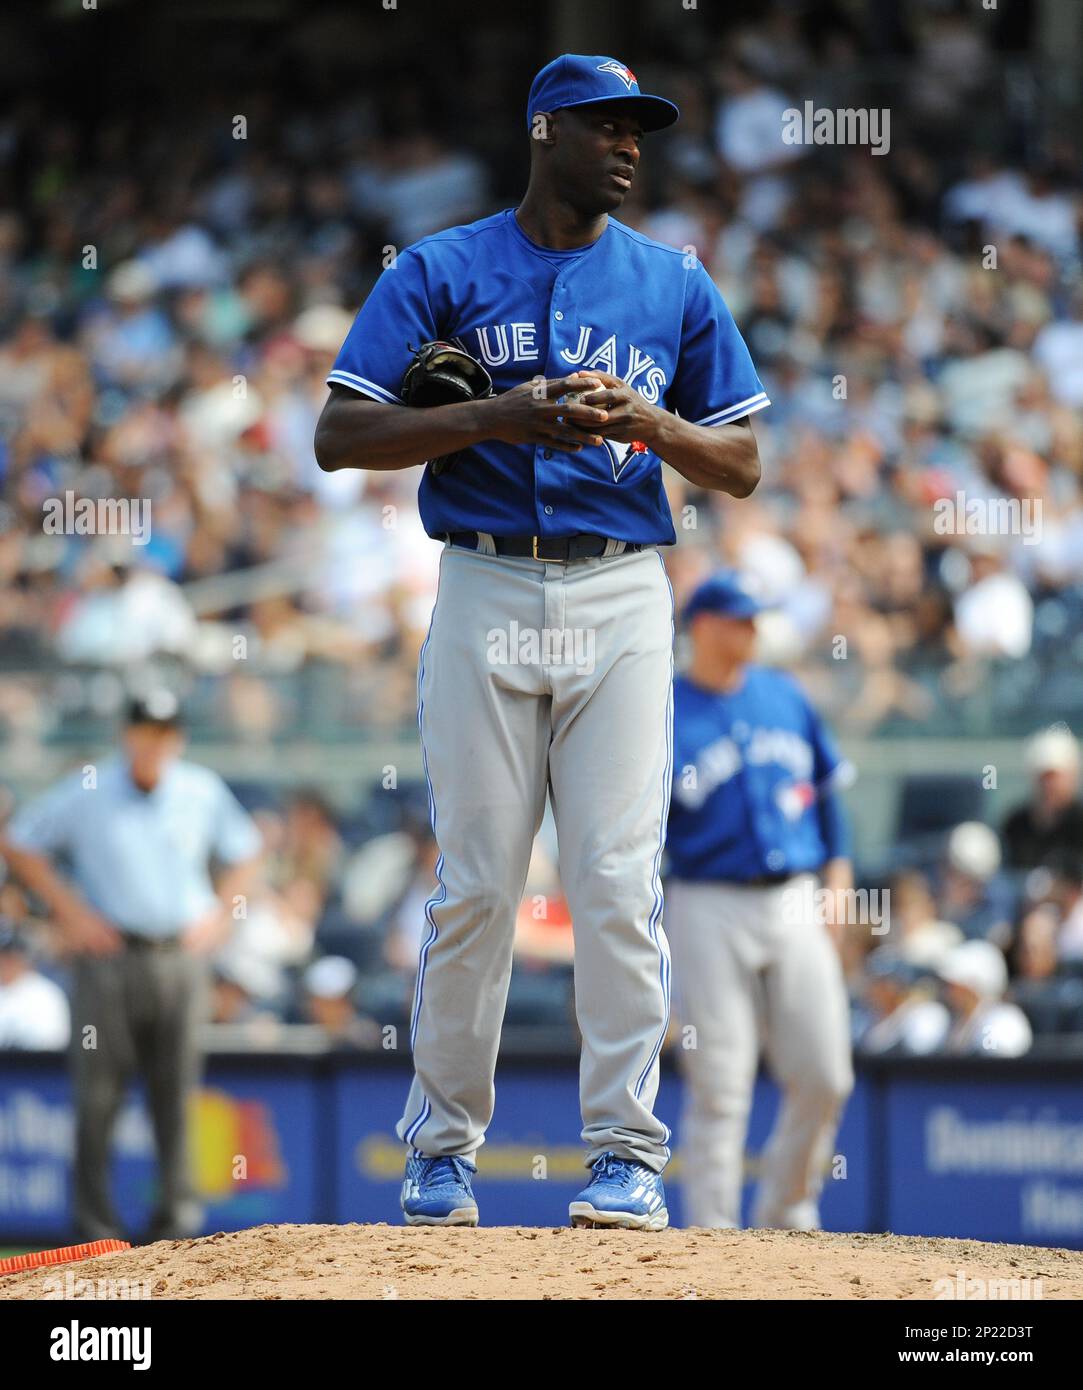 Toronto Blue Jays pitcher LaTroy Hawkins (32) during game against the New  York Yankees at Yankee